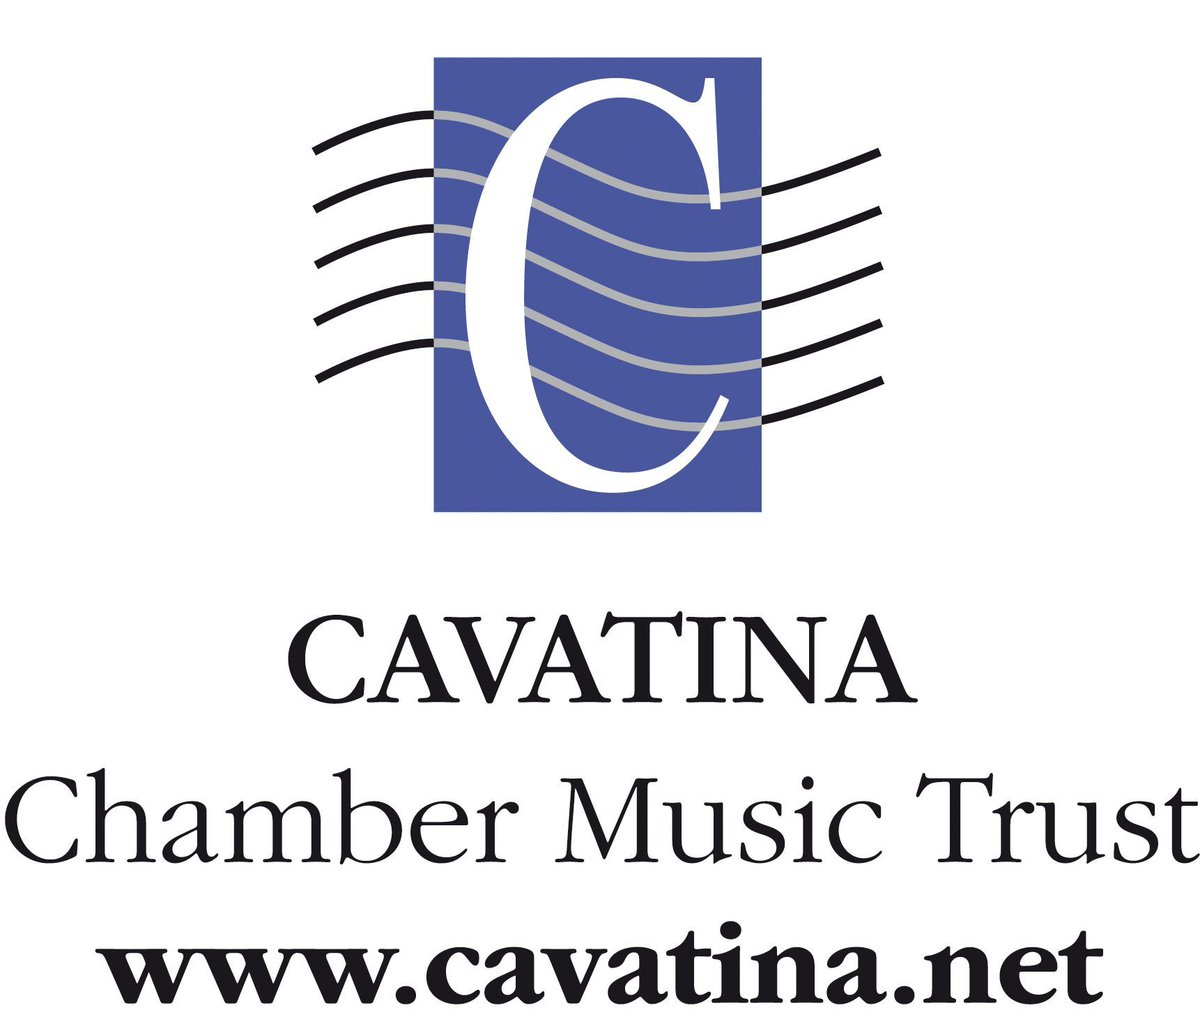 We are delighted to offer free tickets to under 26s for concerts by @ViktoriaMullova & @alasdairbeatson, @EnsembleHesperi, @ConsoneQuartet, @TamsinWaleyCohe & Cordelia Williams, @KosmosEnsemble, and @MithrasTrio thanks to the @cavatinachamber ticket scheme. #musicatpaxton